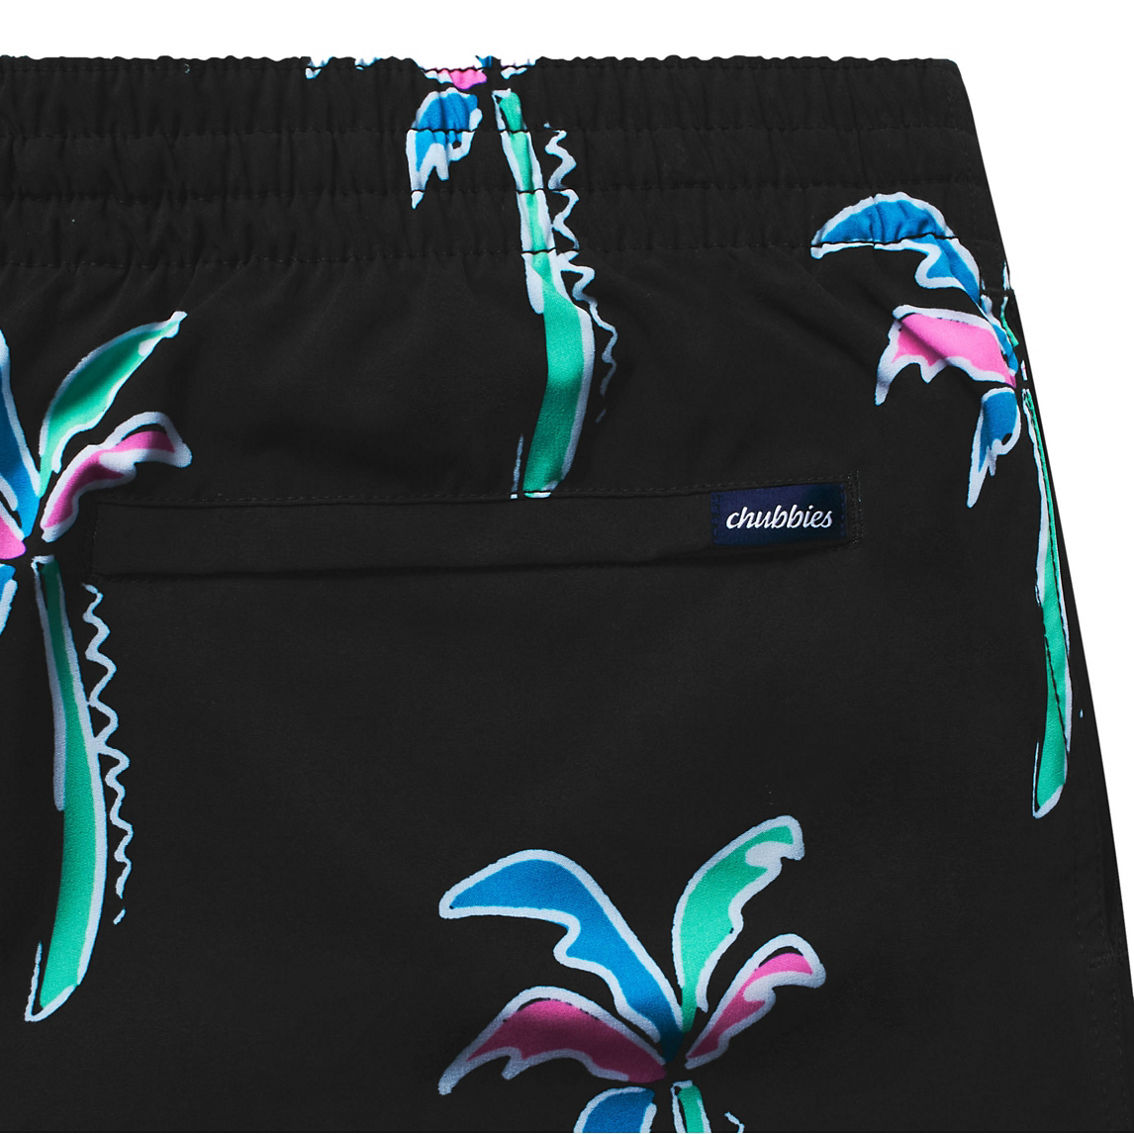 Chubbies The Havana Nights 5.5 in. Classic Lined Trunks - Image 3 of 3